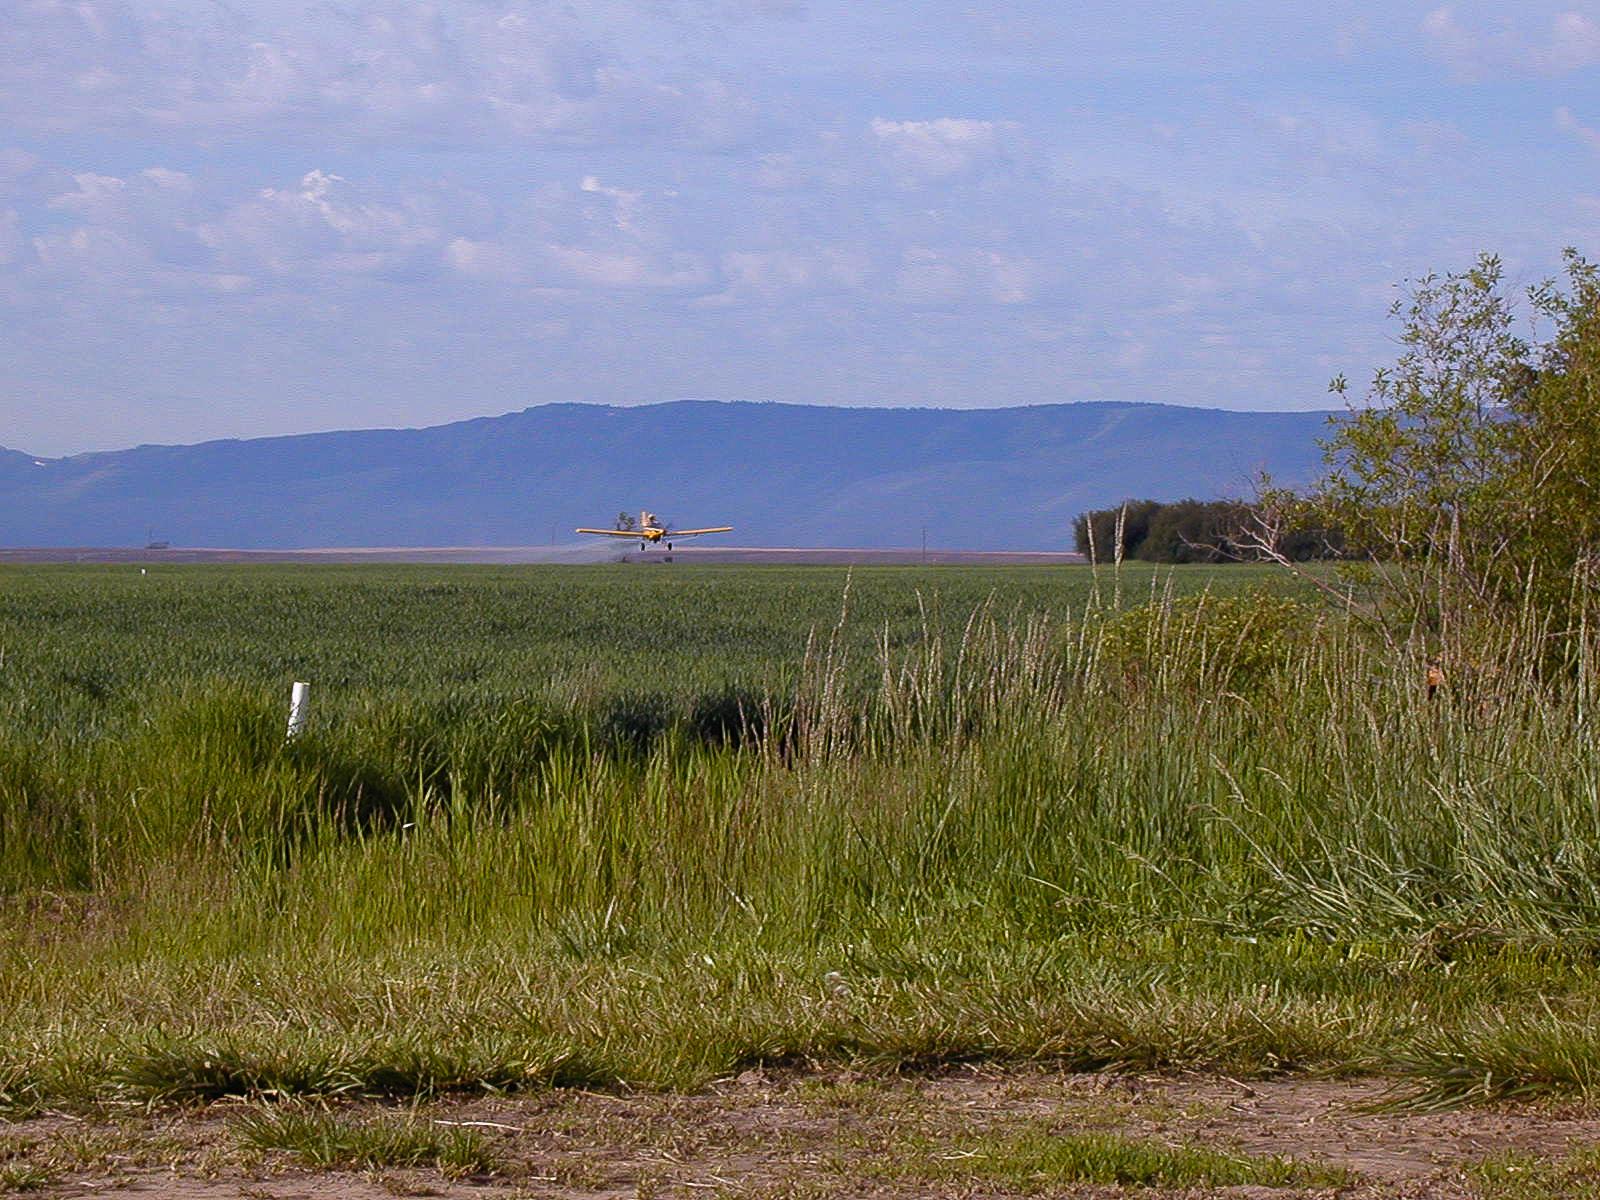 cropduster flies low over a grassy field with blue foothills in distance